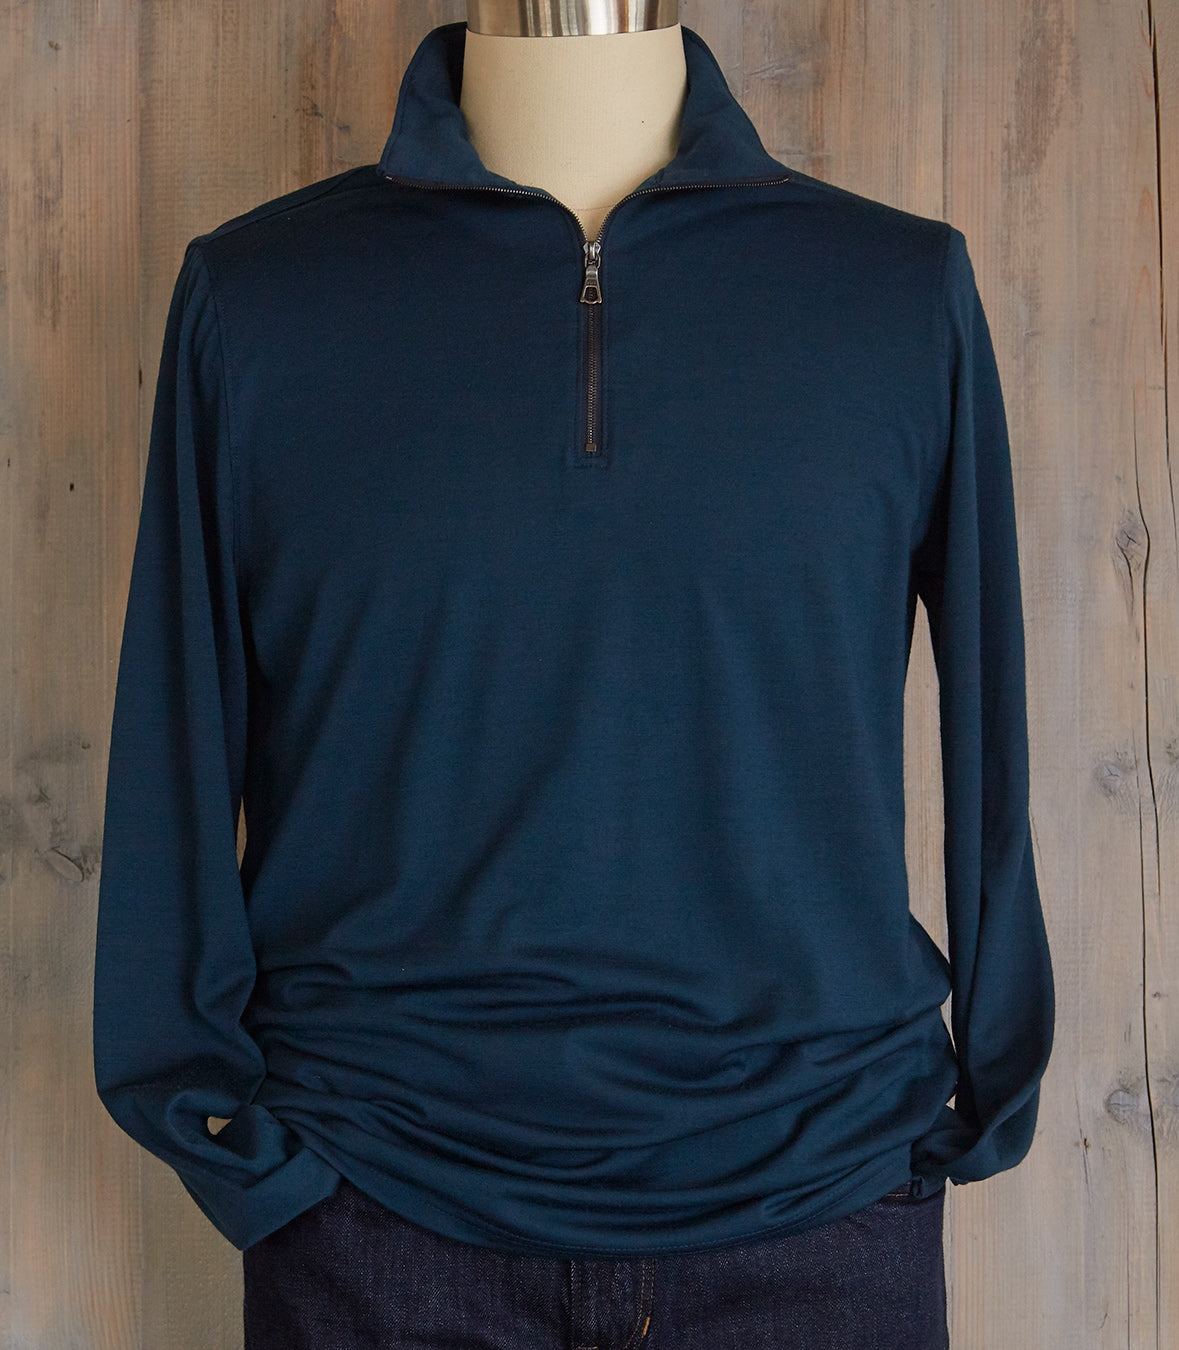 Wool Quarter Zip Pullover Made in USA | RAMBLERS WAY